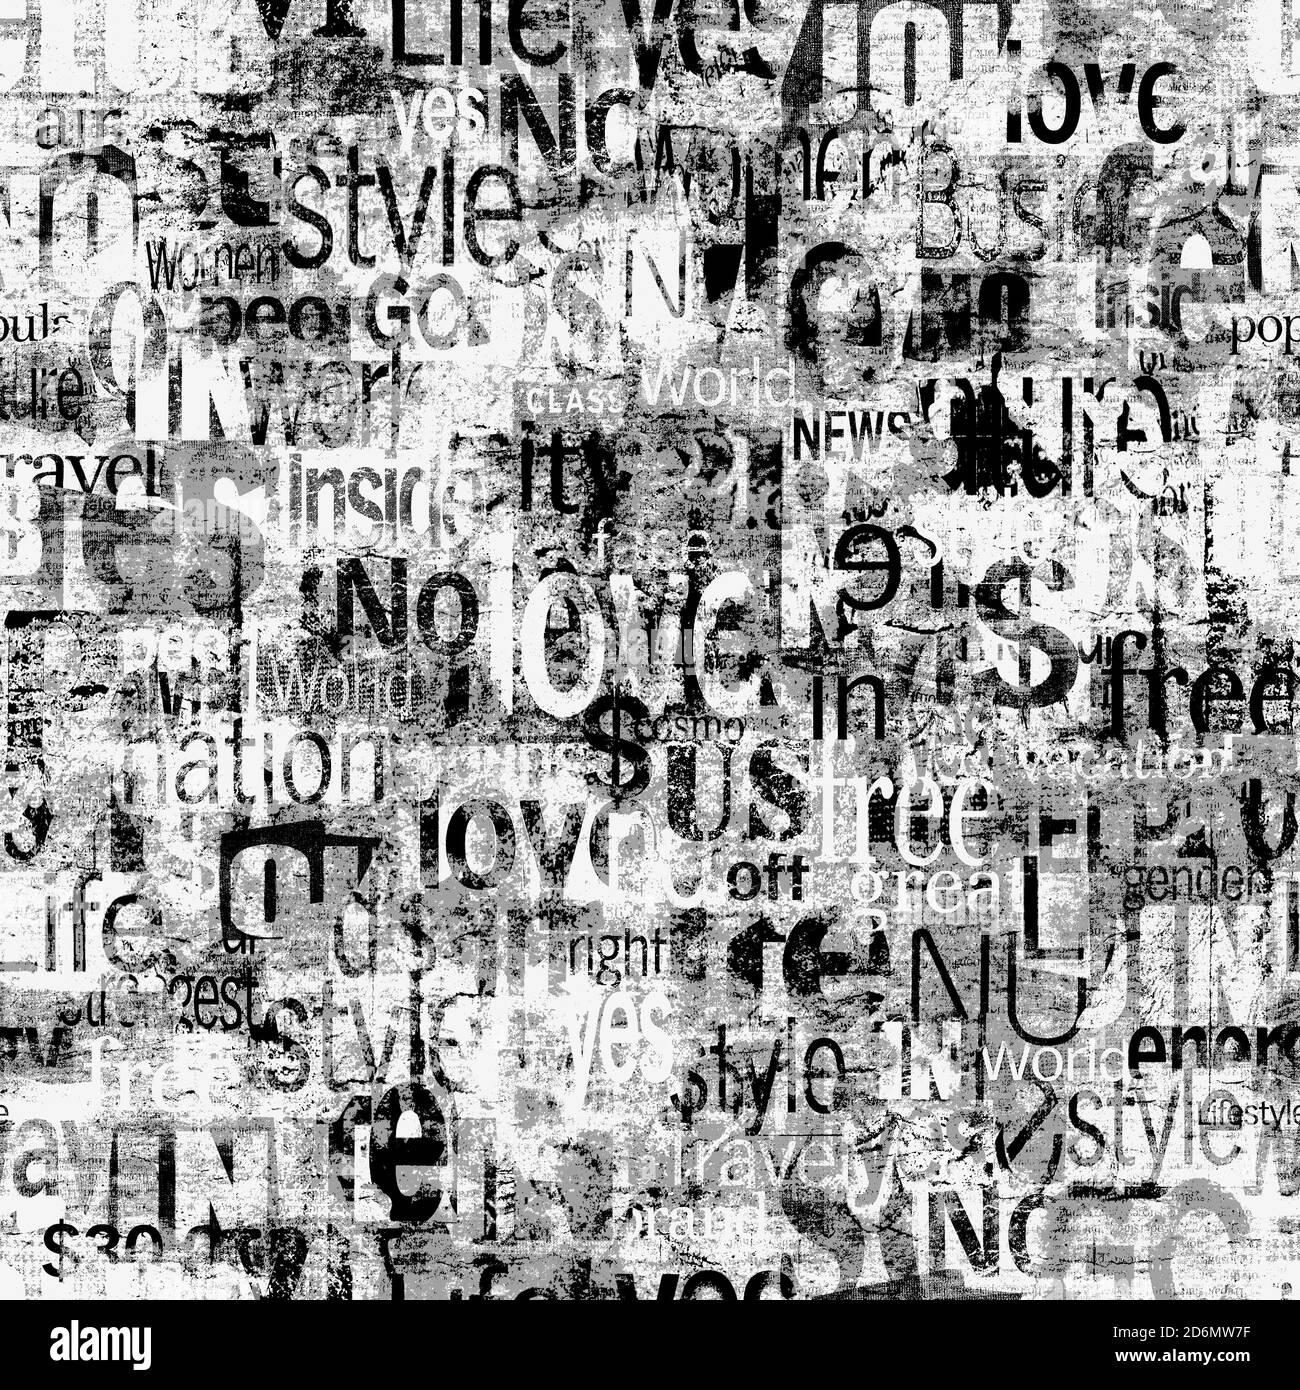 Abstract grunge urban geometric words, letters seamless pattern. Aged newspaper, magazine textured paper background. Black white collage repeating tex Stock Photo